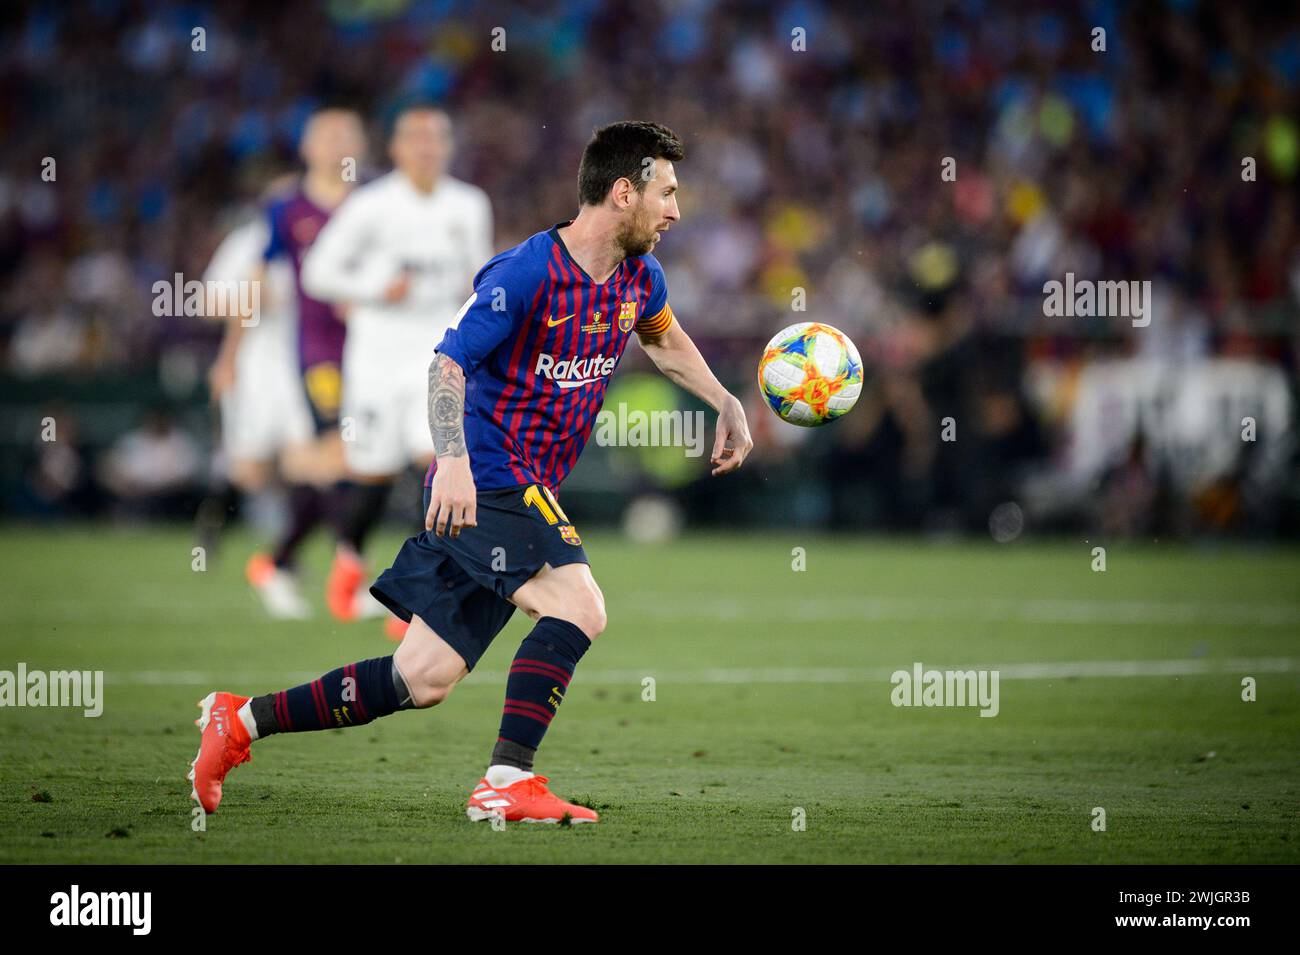 Futbol Club Barcelona's Leo Messi controlling the ball on the run during the Copa del Rey Final in Seville, Spain. Stock Photo